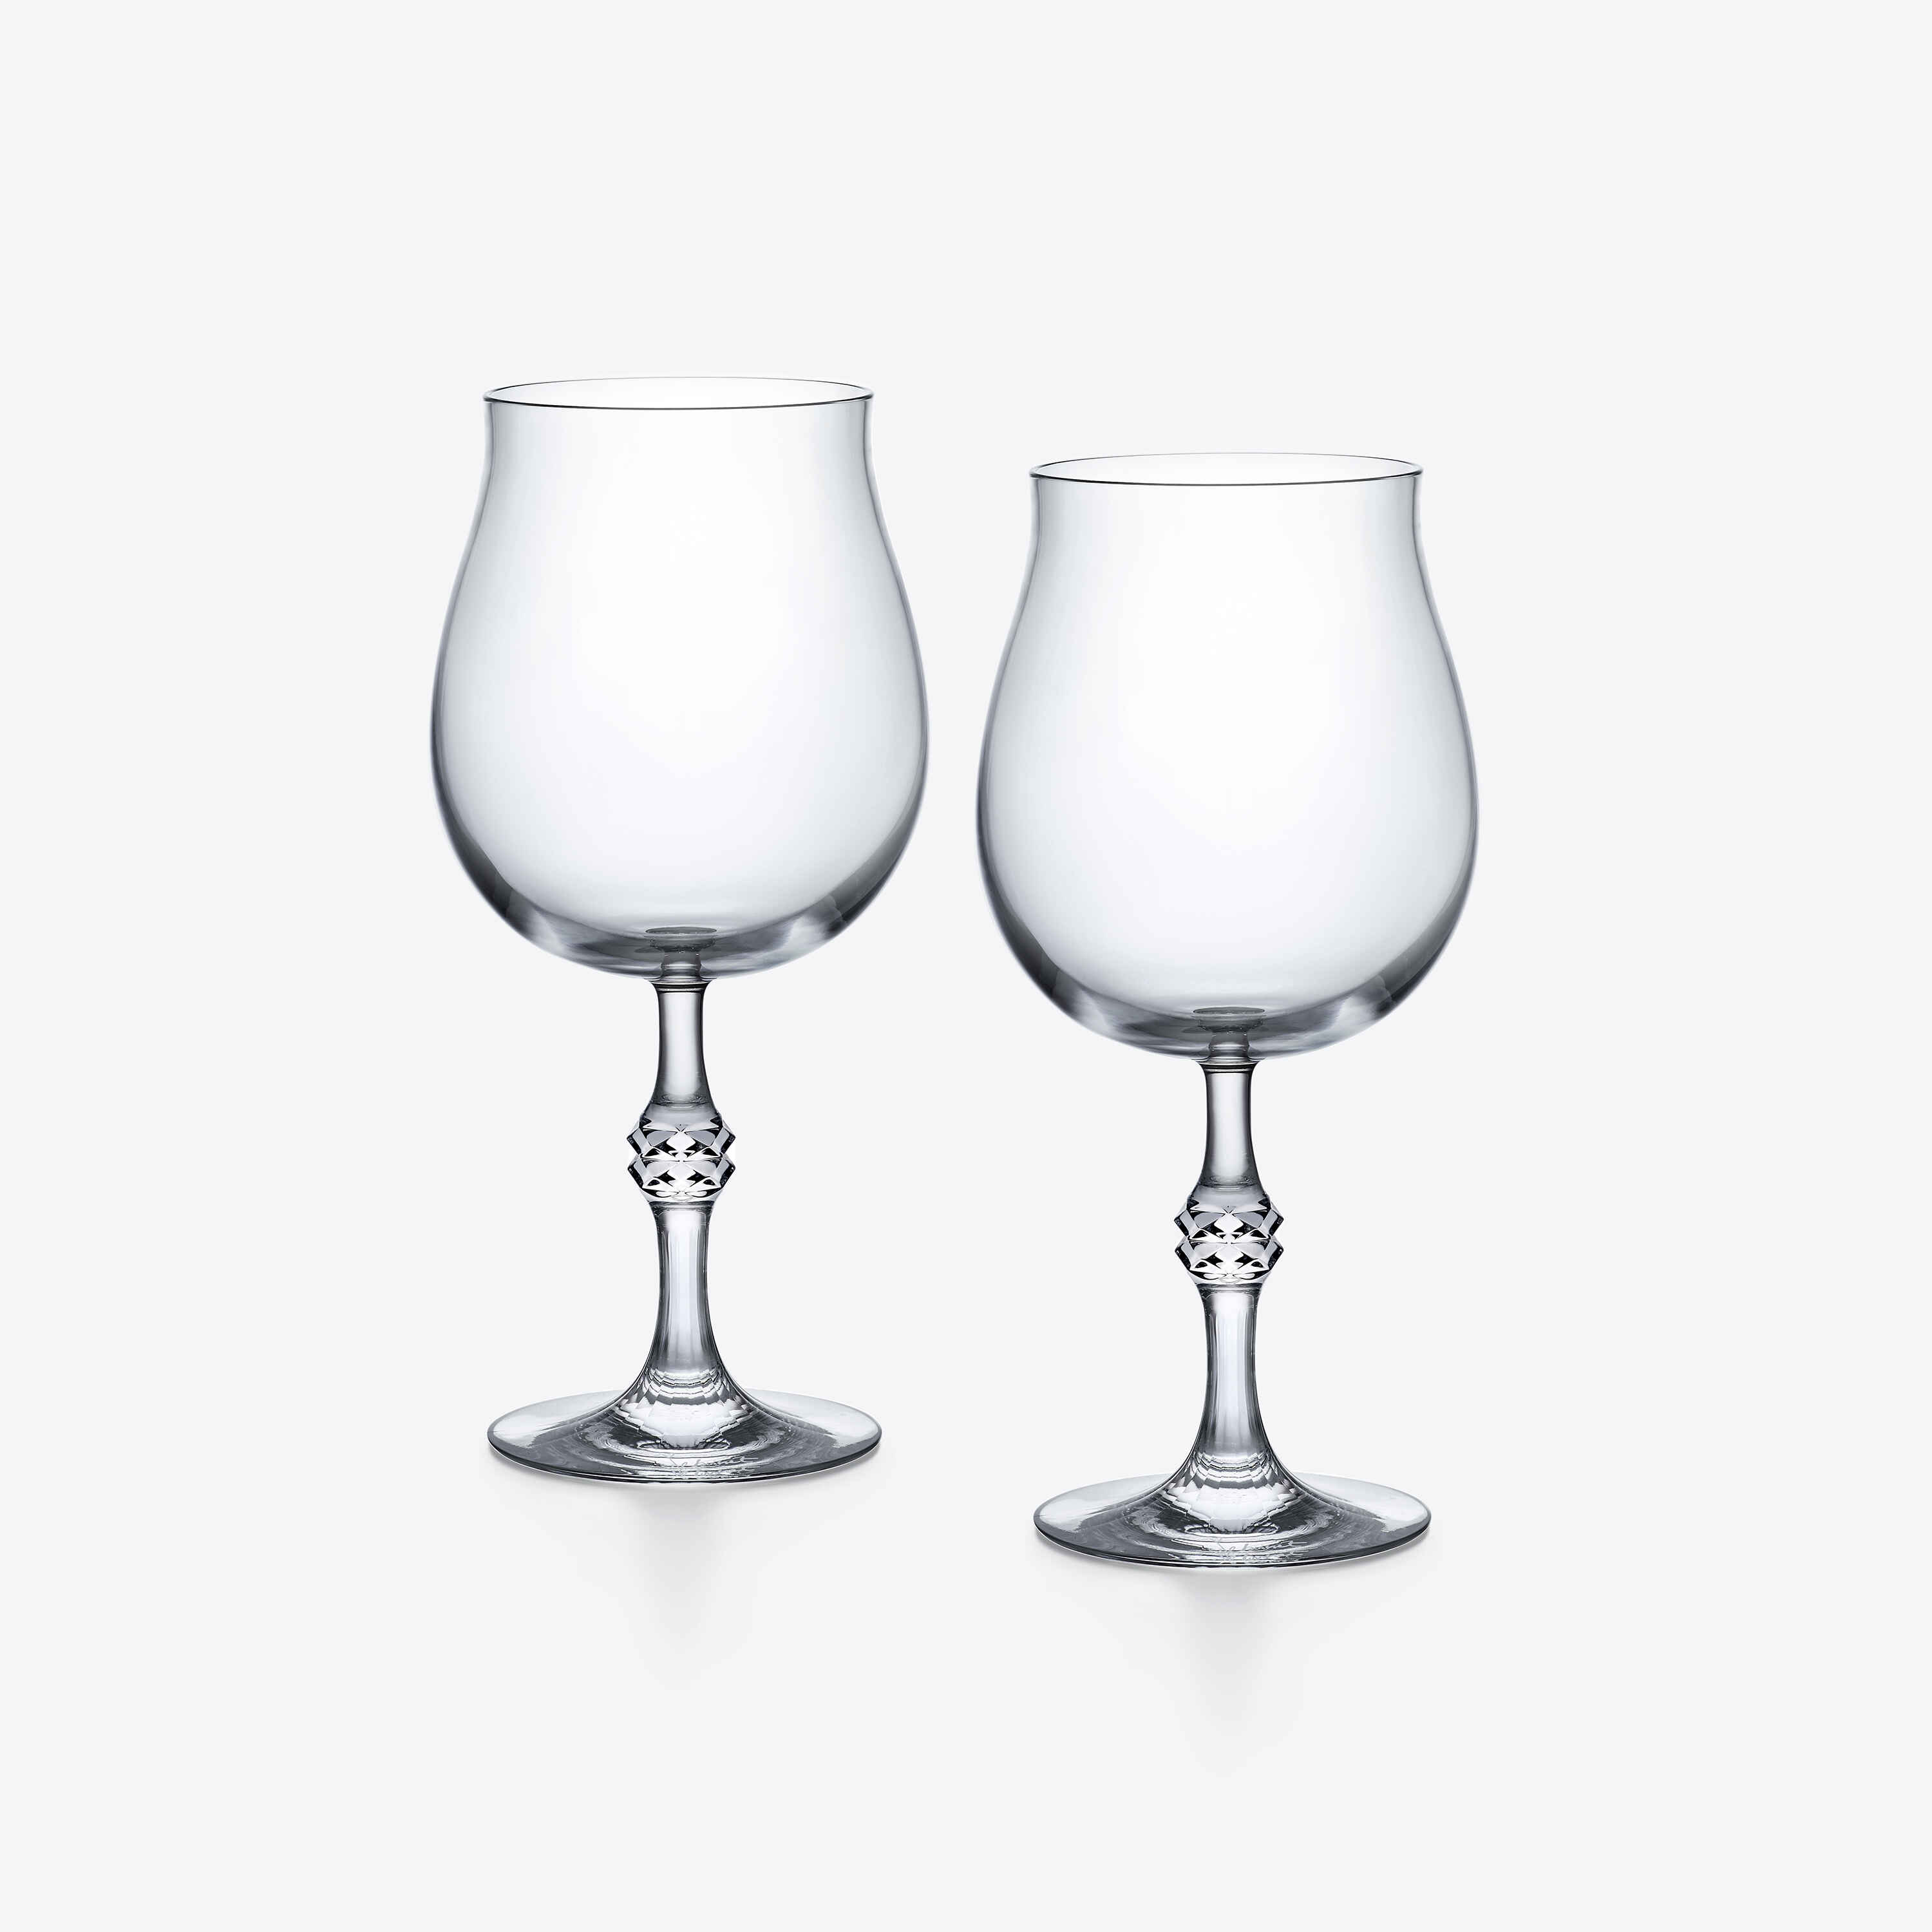 How To Spot High Quality Glassware, According To A Master Of Wine